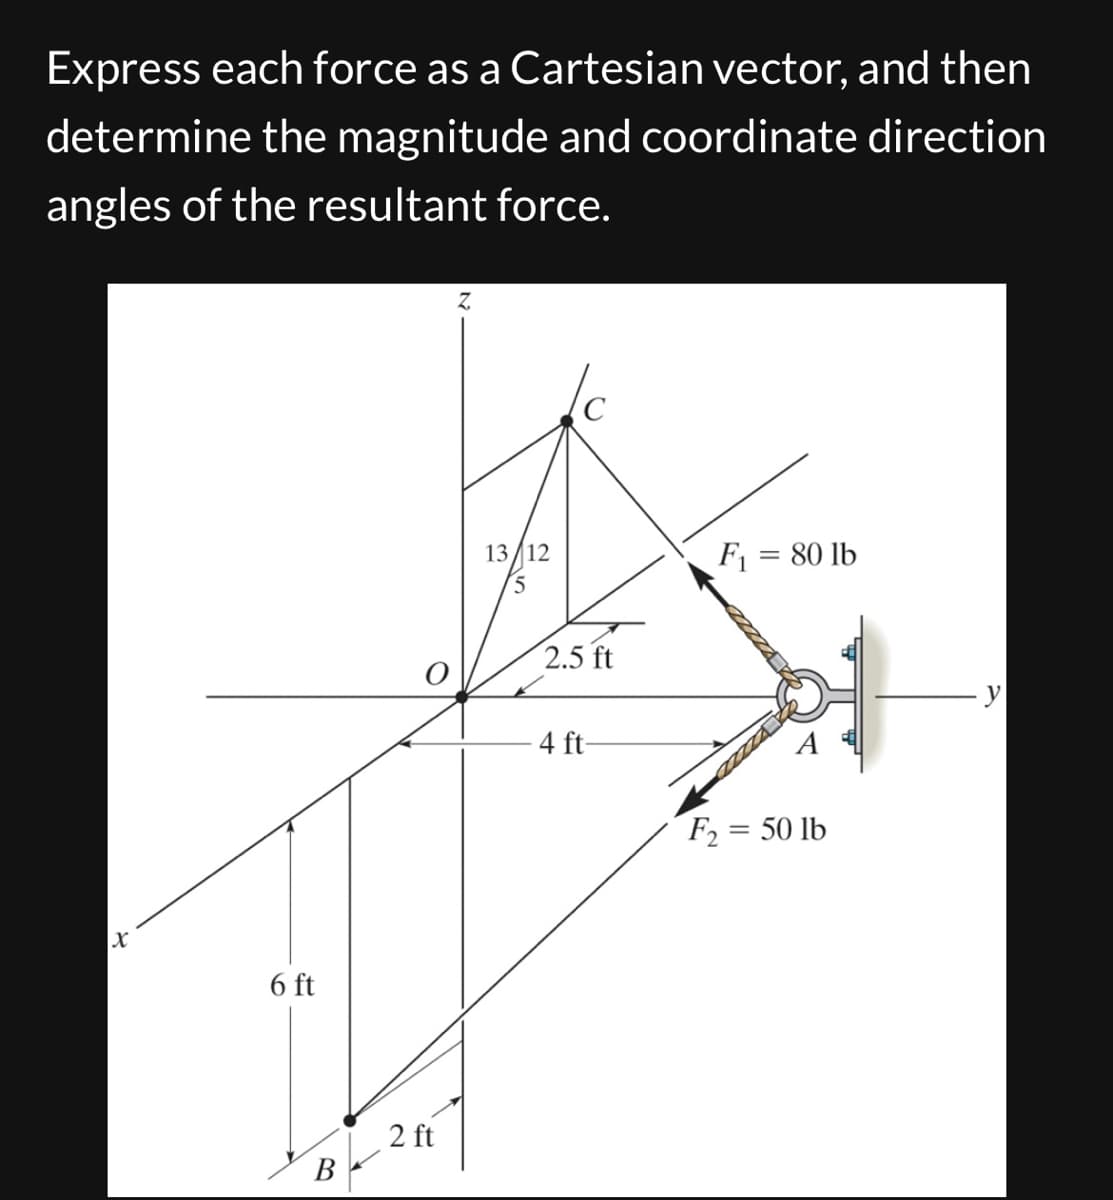 Express each force as a Cartesian vector, and then
determine the magnitude and coordinate direction
angles of the resultant force.
x
6 ft
B
2 ft
Z
13/12
5
2.5 ft
-4 ft-
F₁ = 80 lb
F₂ = 50 lb